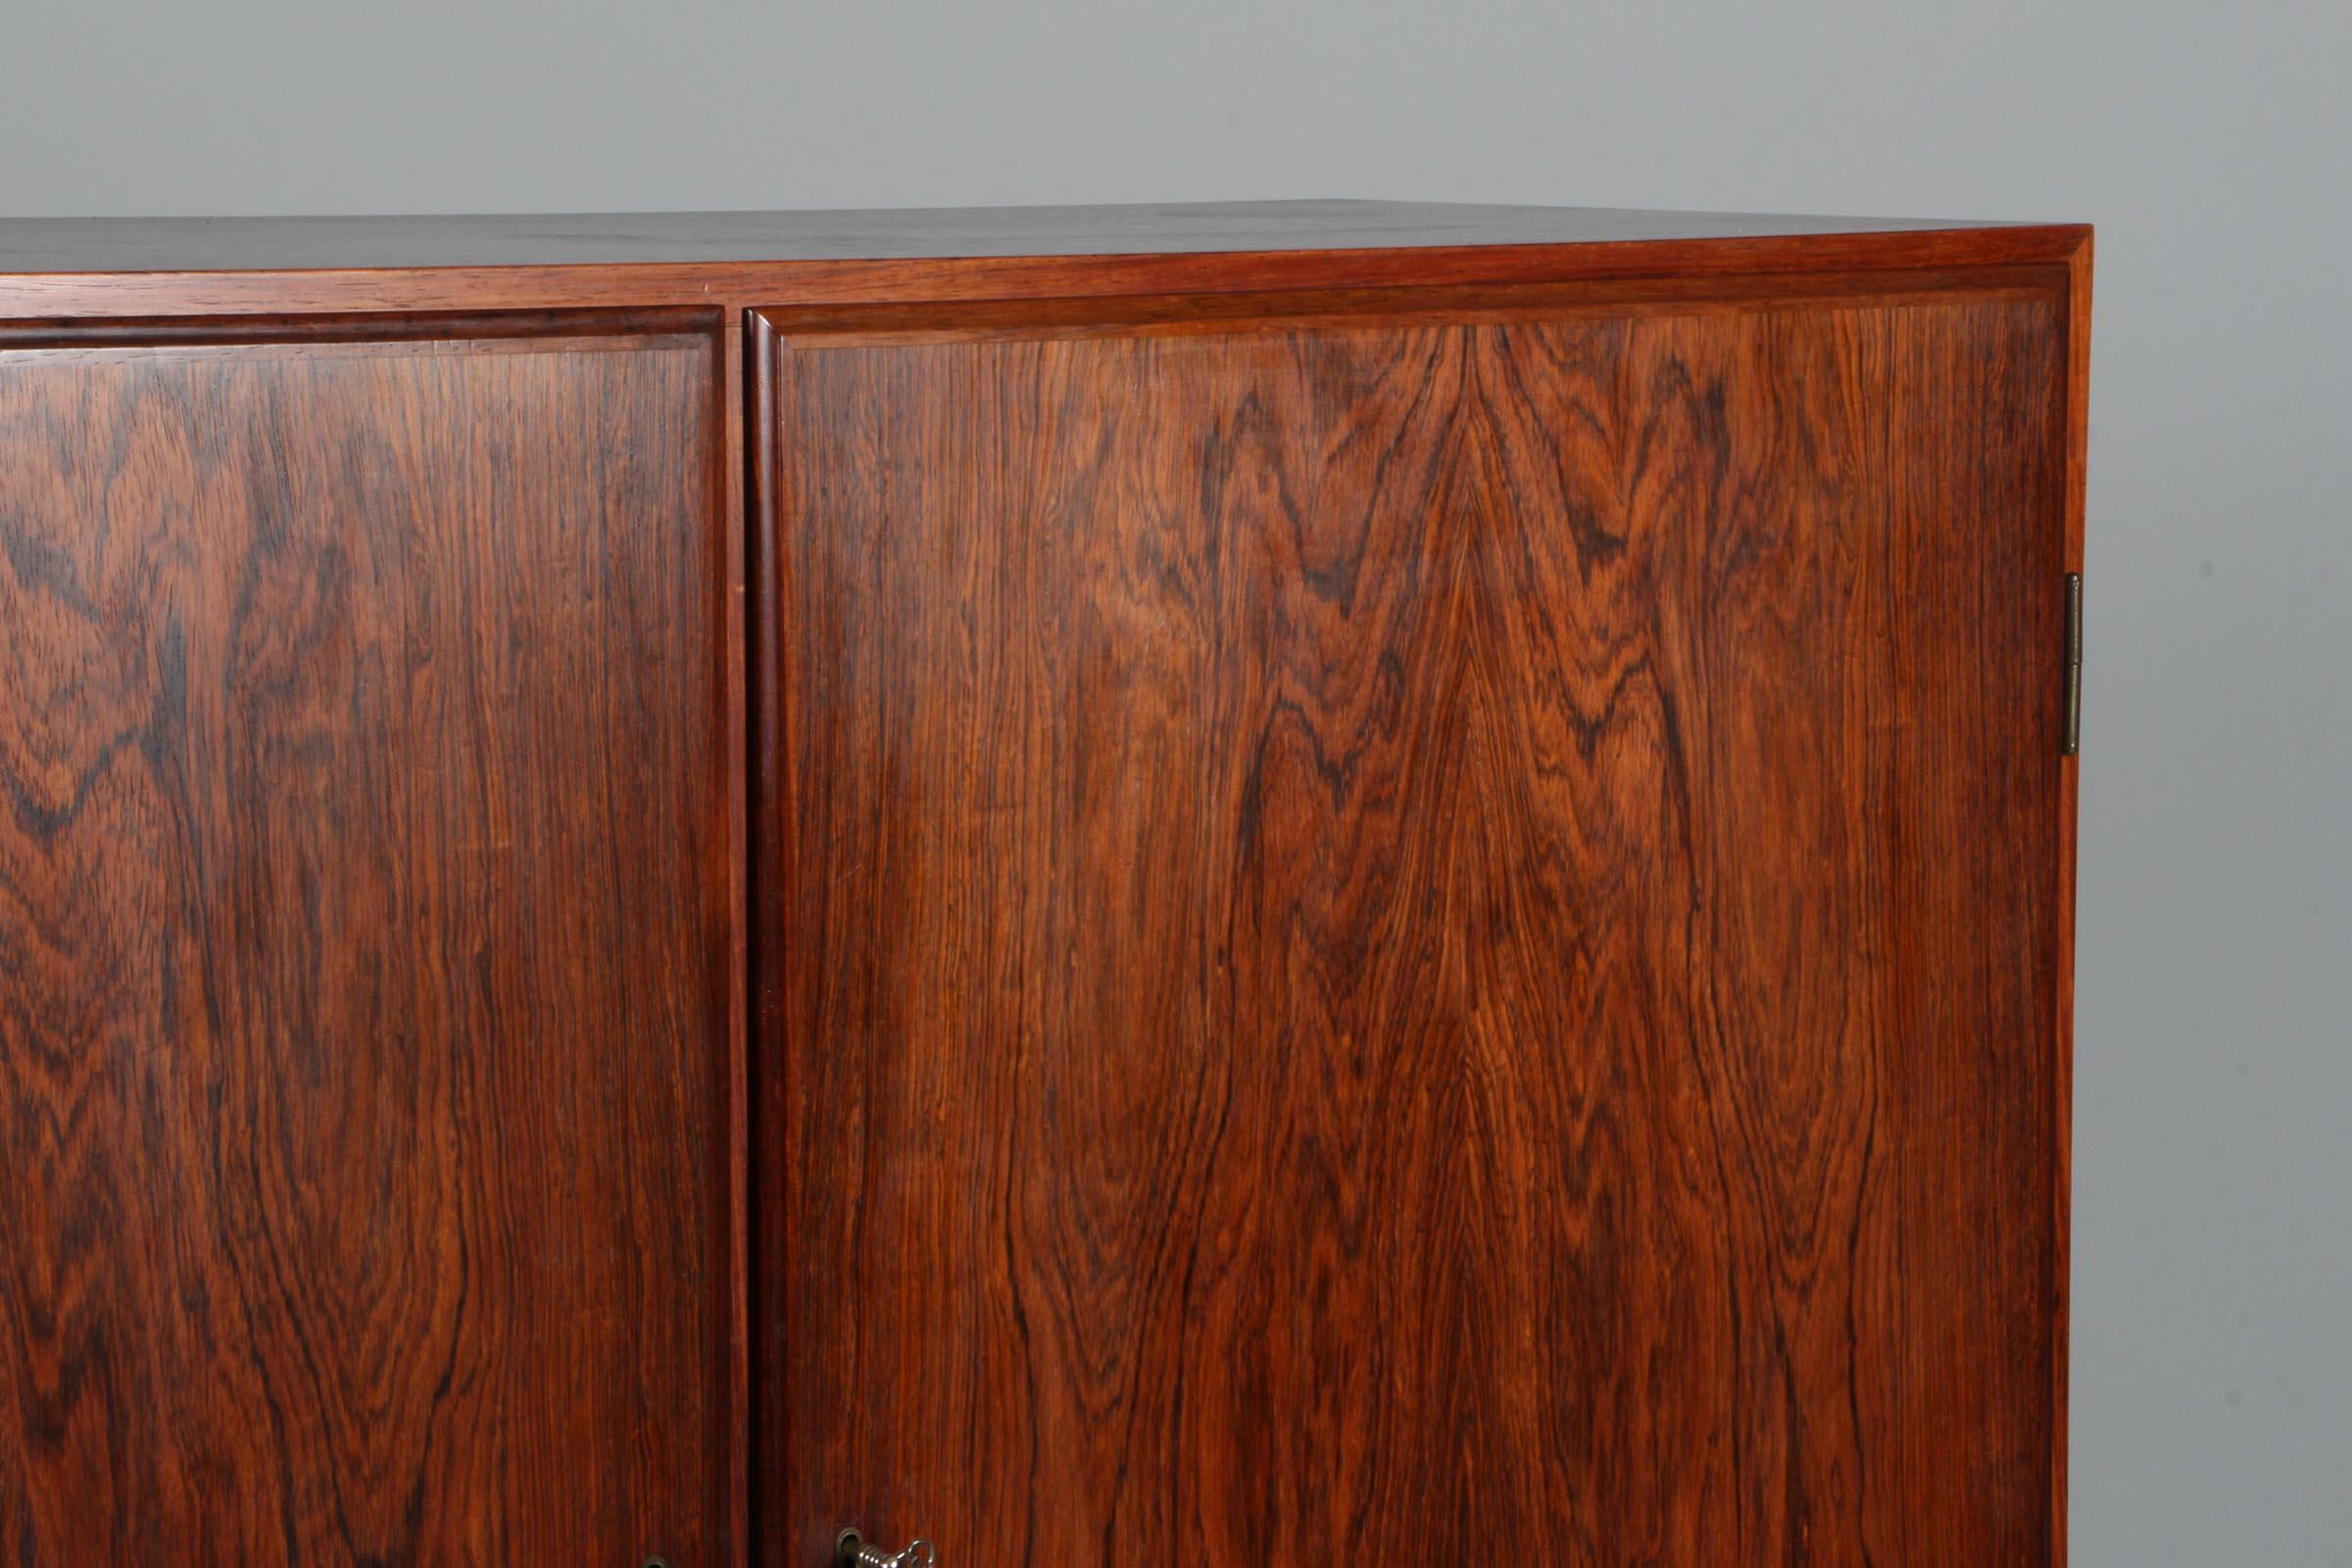 Heltborg cabinet of rosewood with drawers and doors.

Made by Heltborg Møbler.